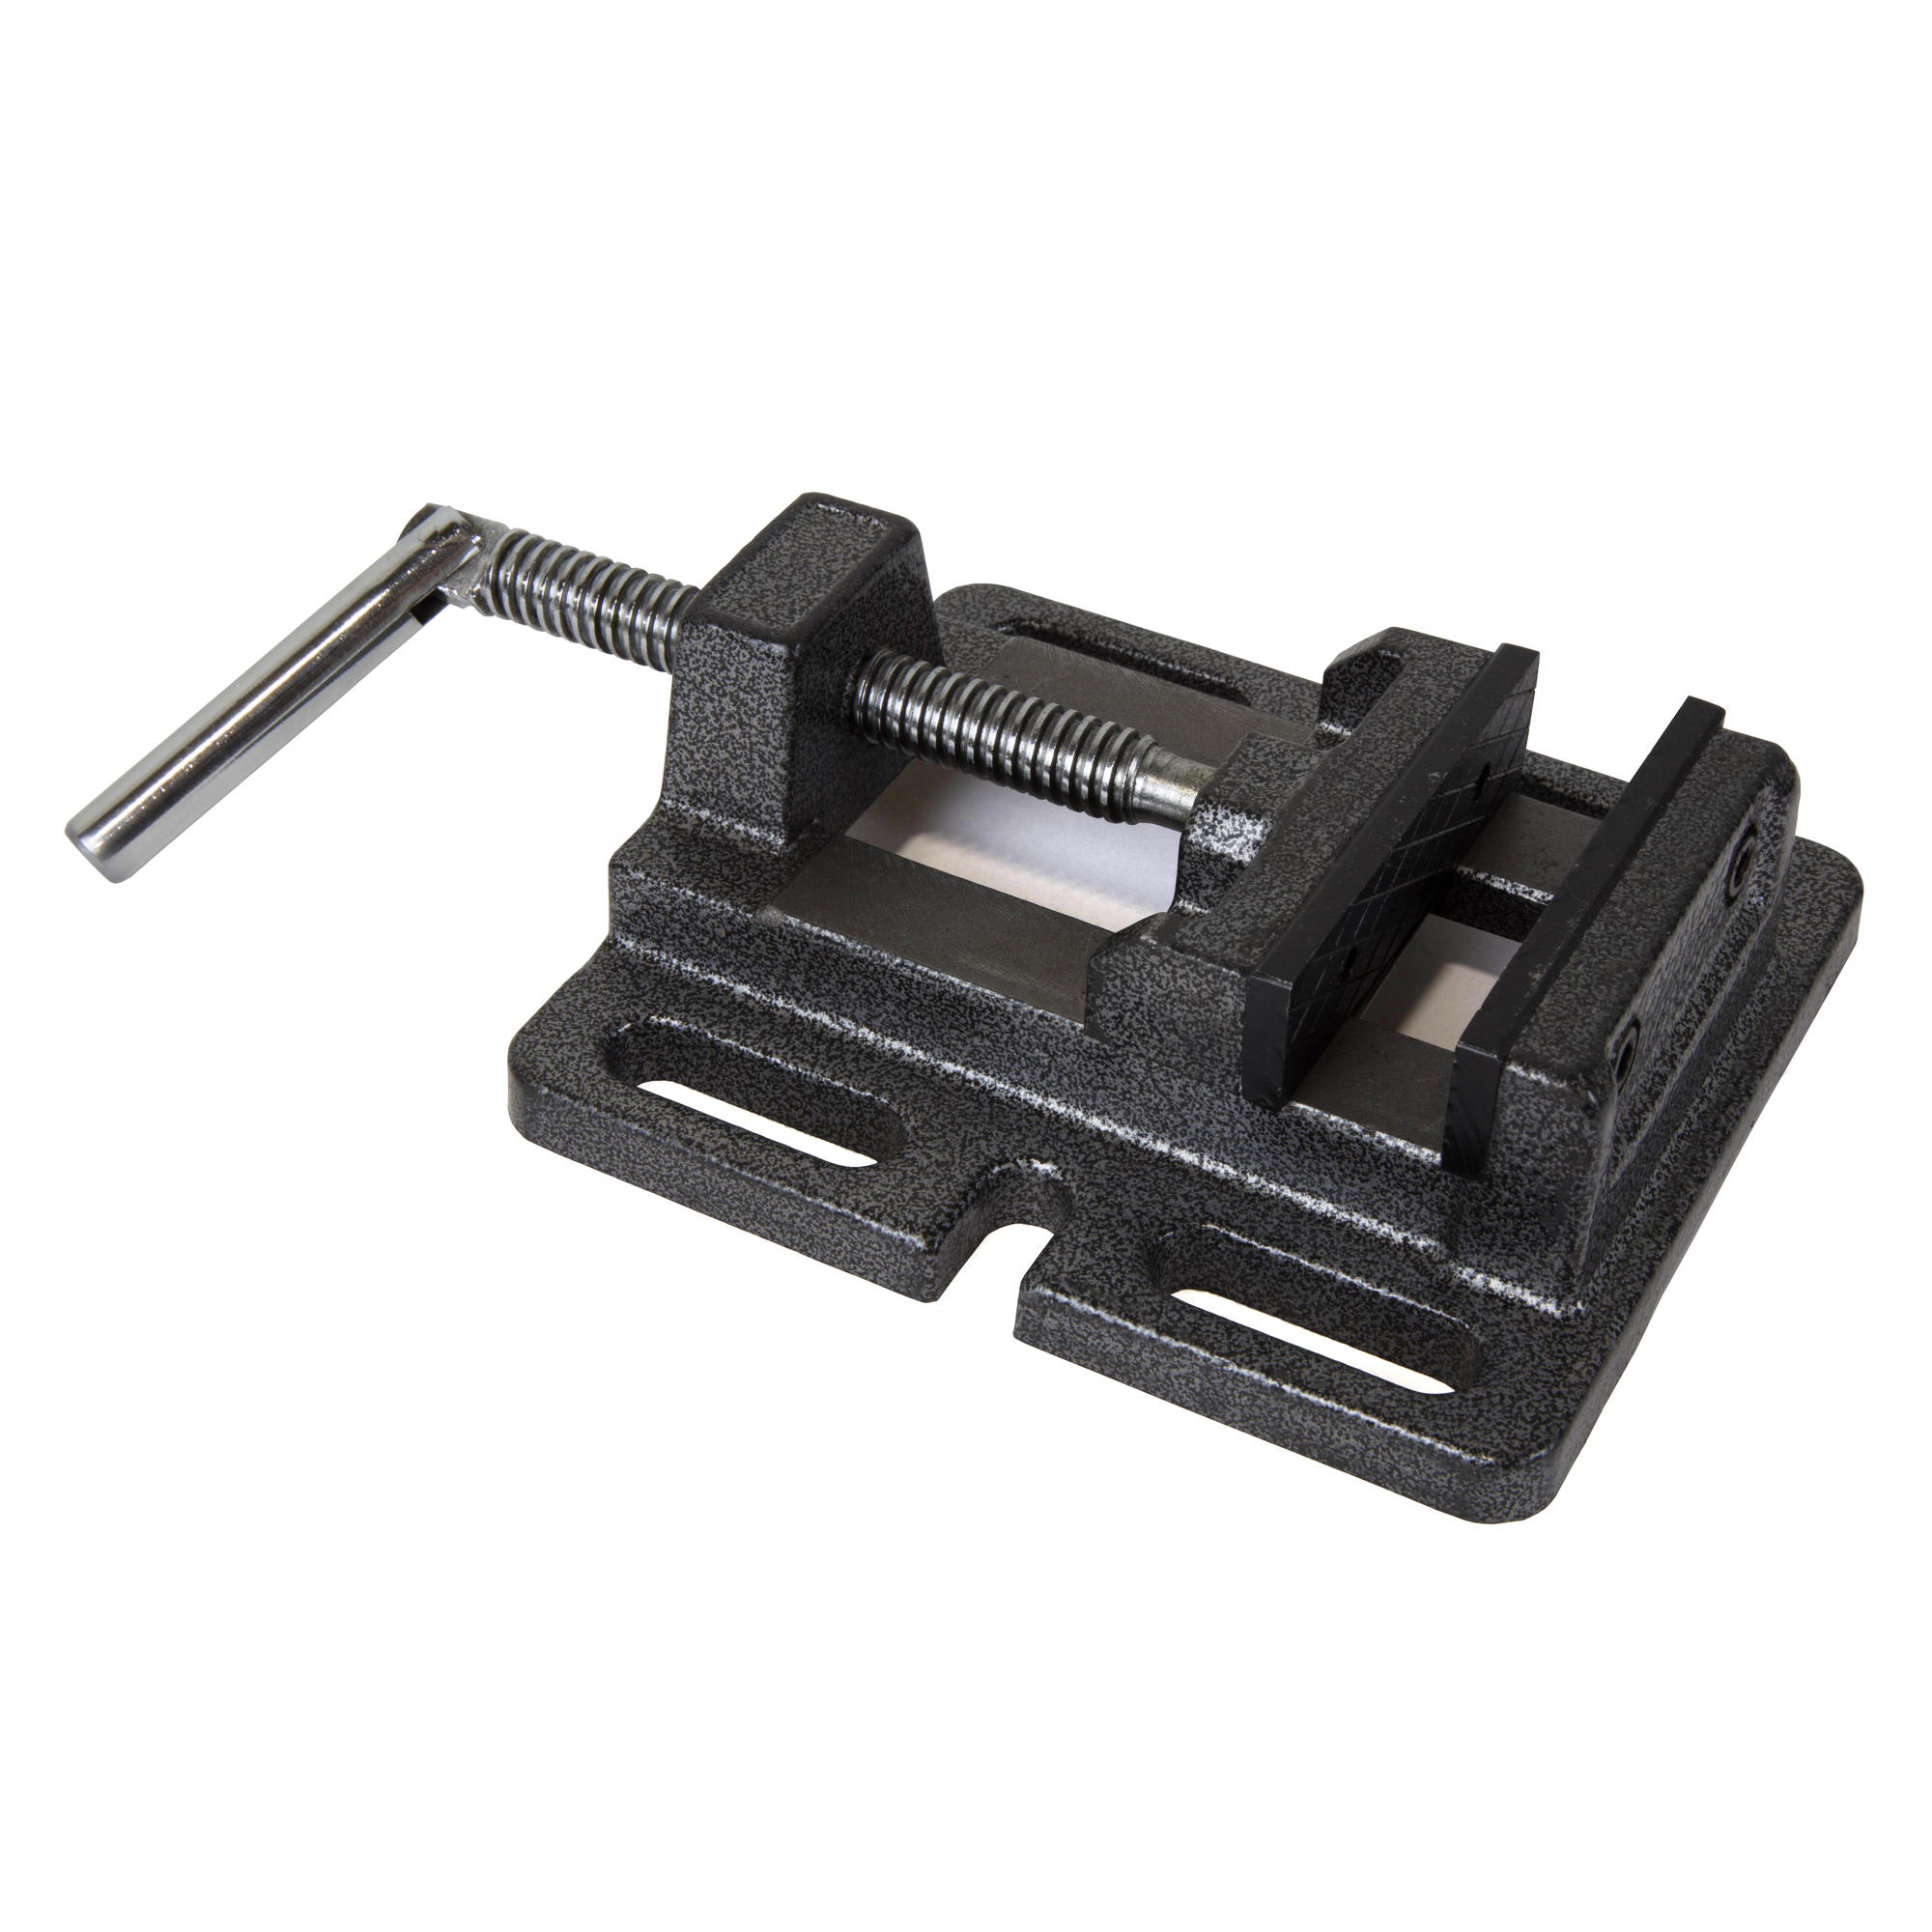 WEN, 3Inch Drill Press Vise, Jaw Width 3 in, Jaw Capacity 3.1 in, Material Cast Iron, Model DPA423